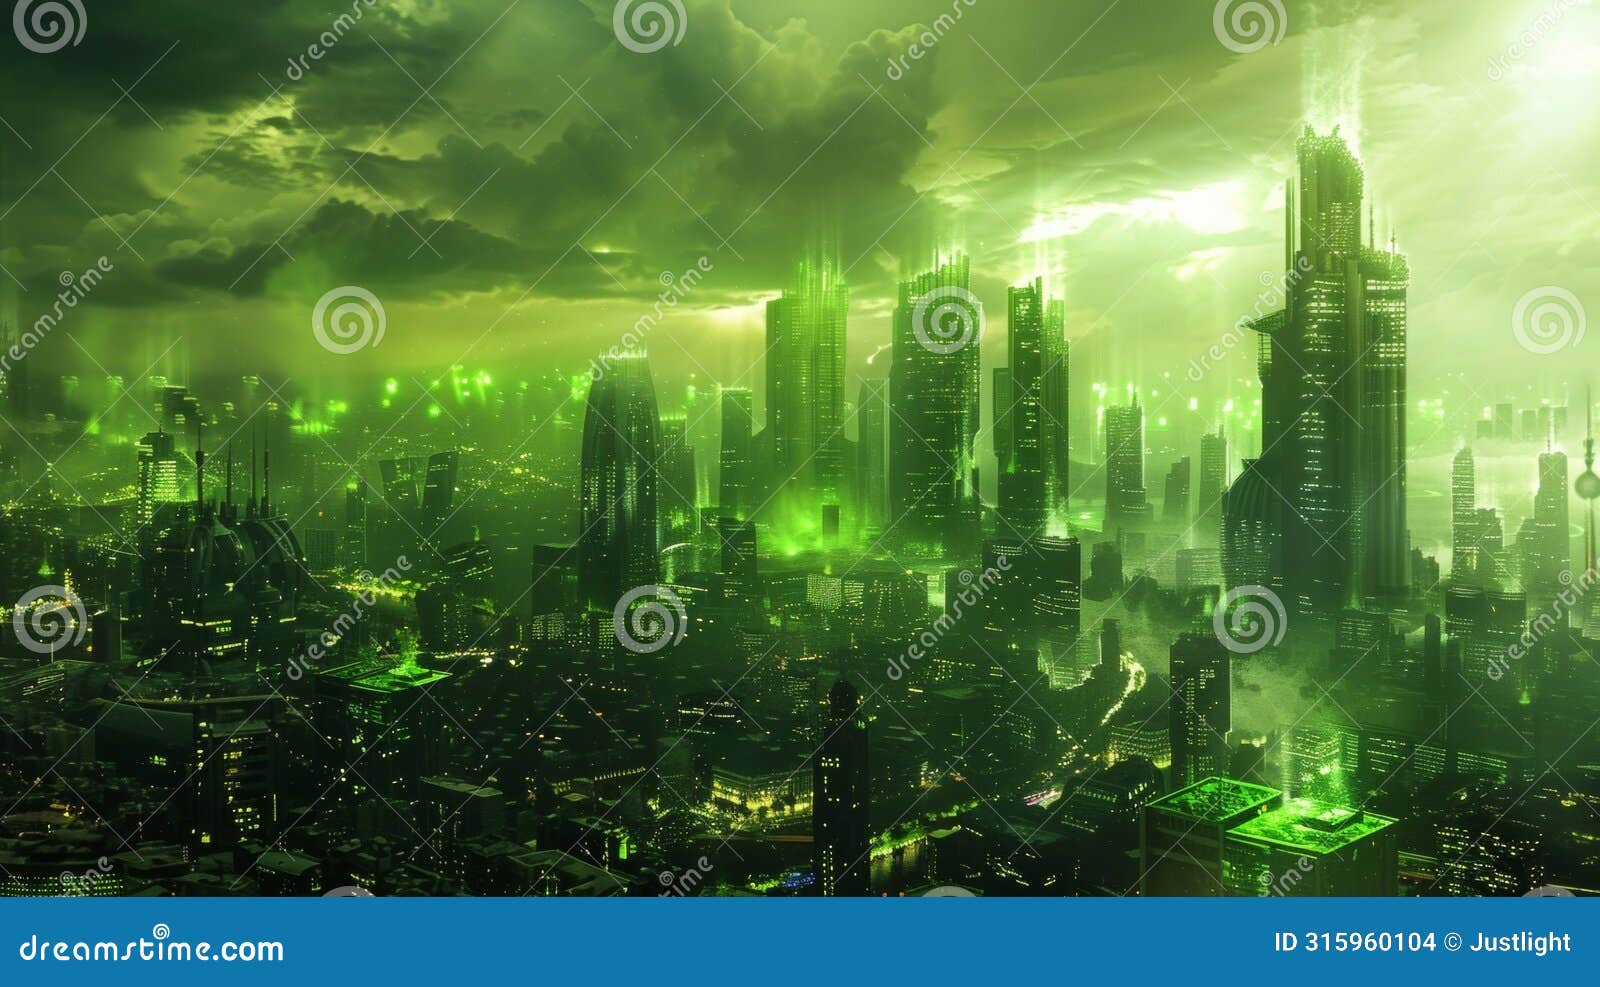 a futuristic cityscape powered solely by the glowing green flames of biofuel illustrating the immense potential and